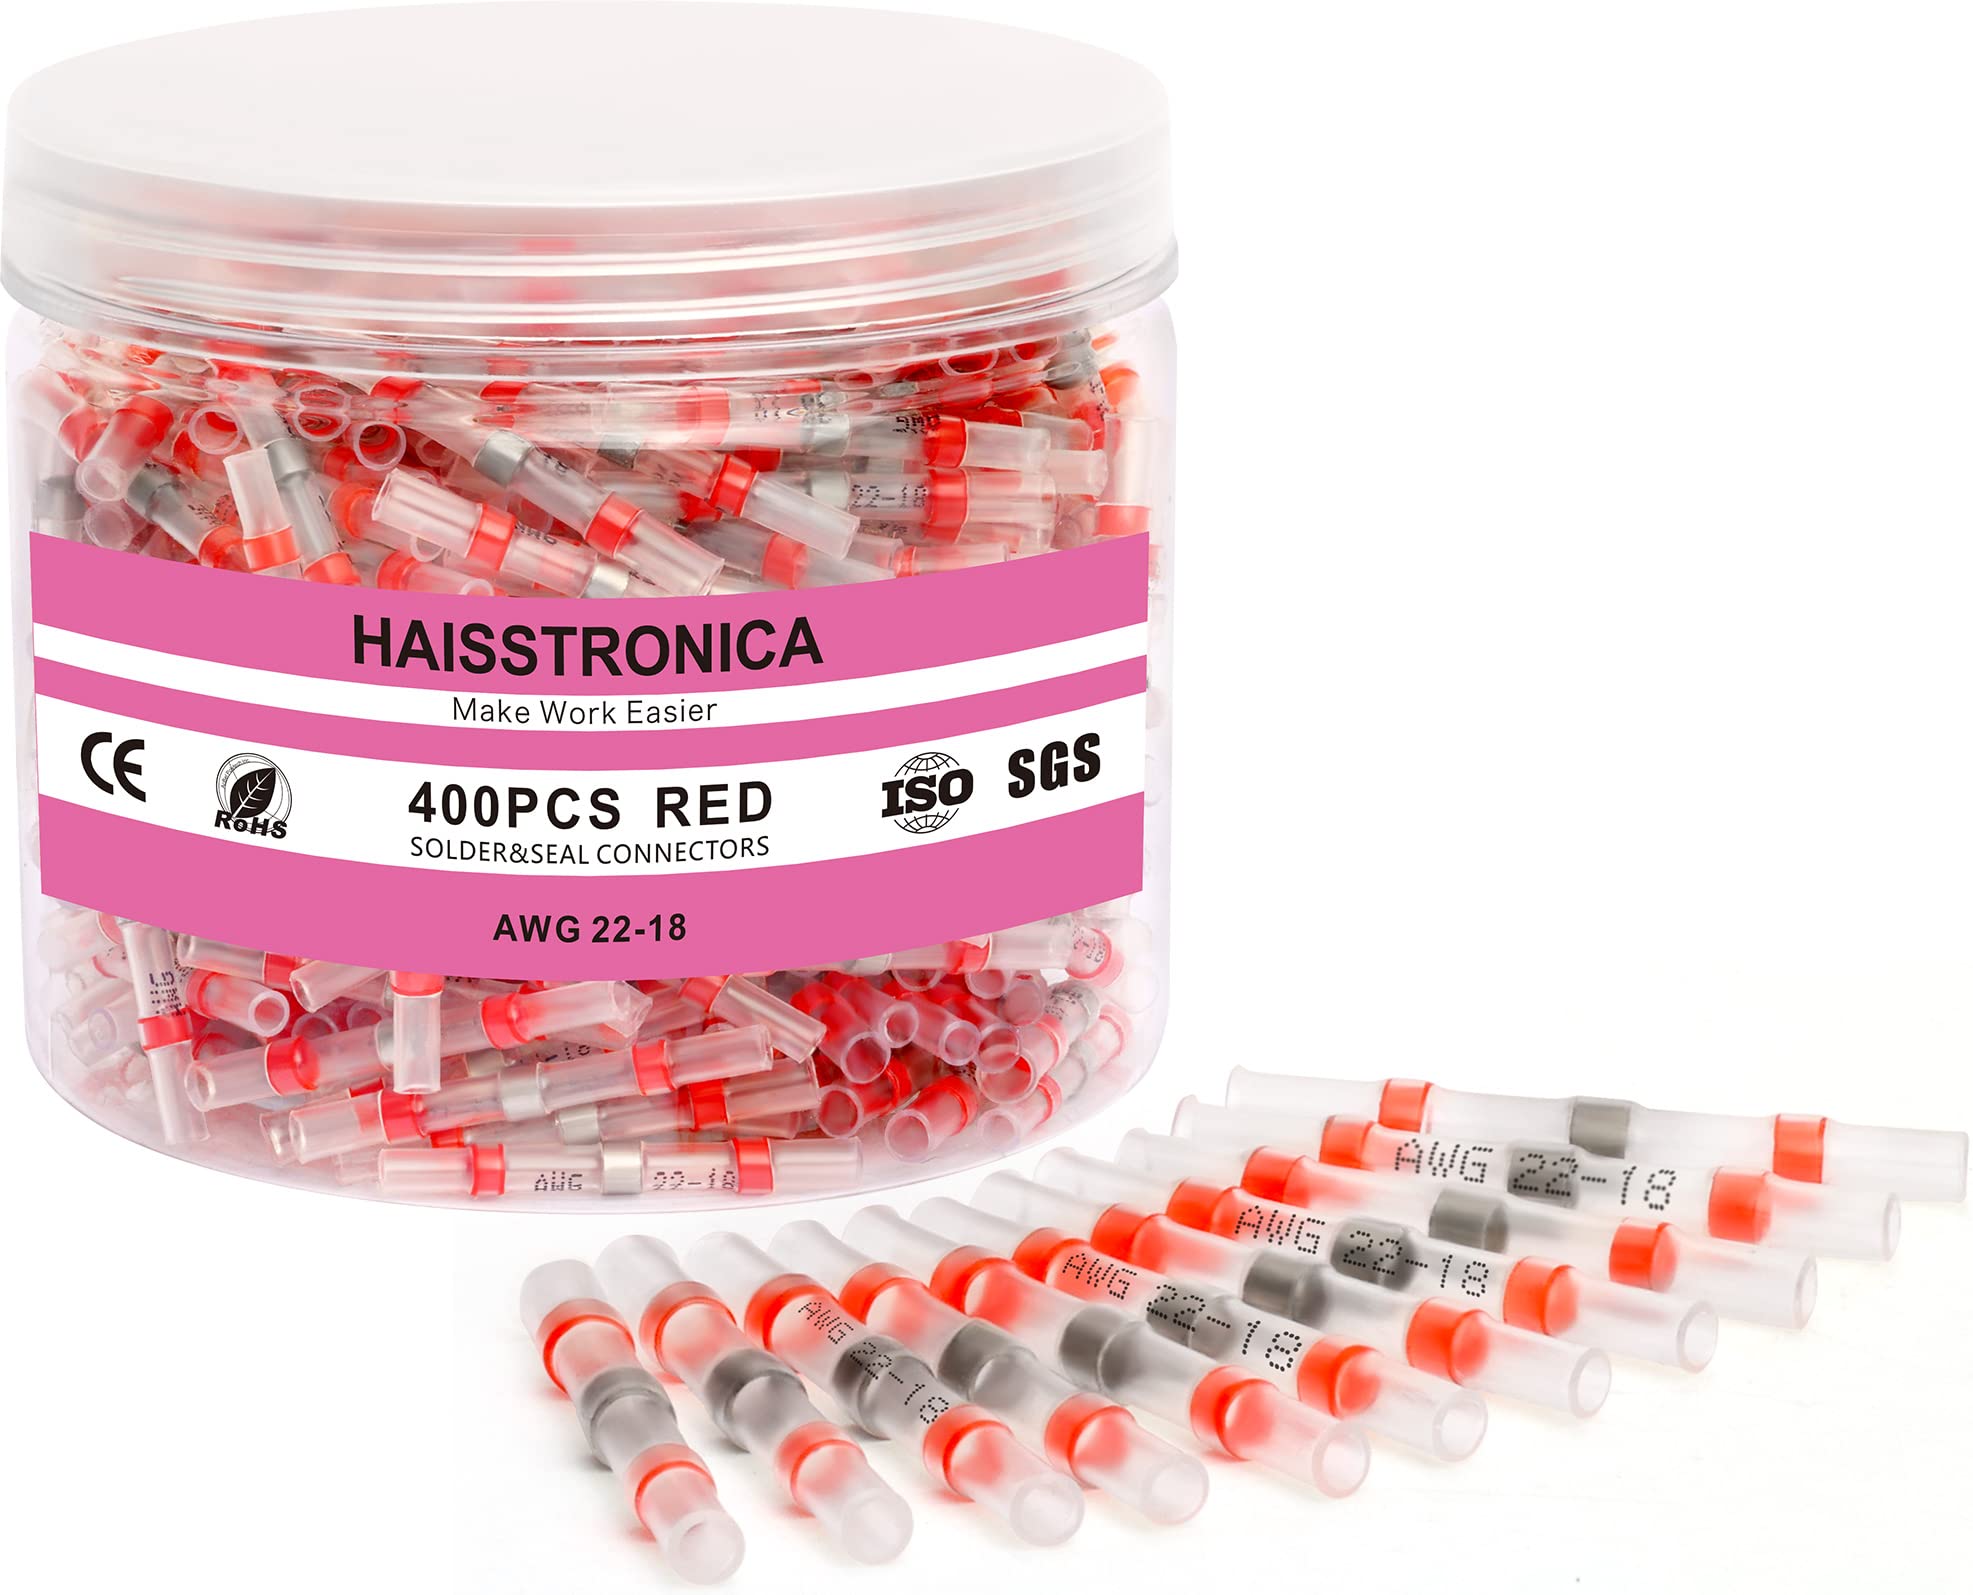 haisstronica 400PCS Solder Seal Wire Connectors,Heat Shrink Butt Connectors, Insulate Waterproof Wire Connectors for Watercraft,Electrical,Electronics 22-18 Red